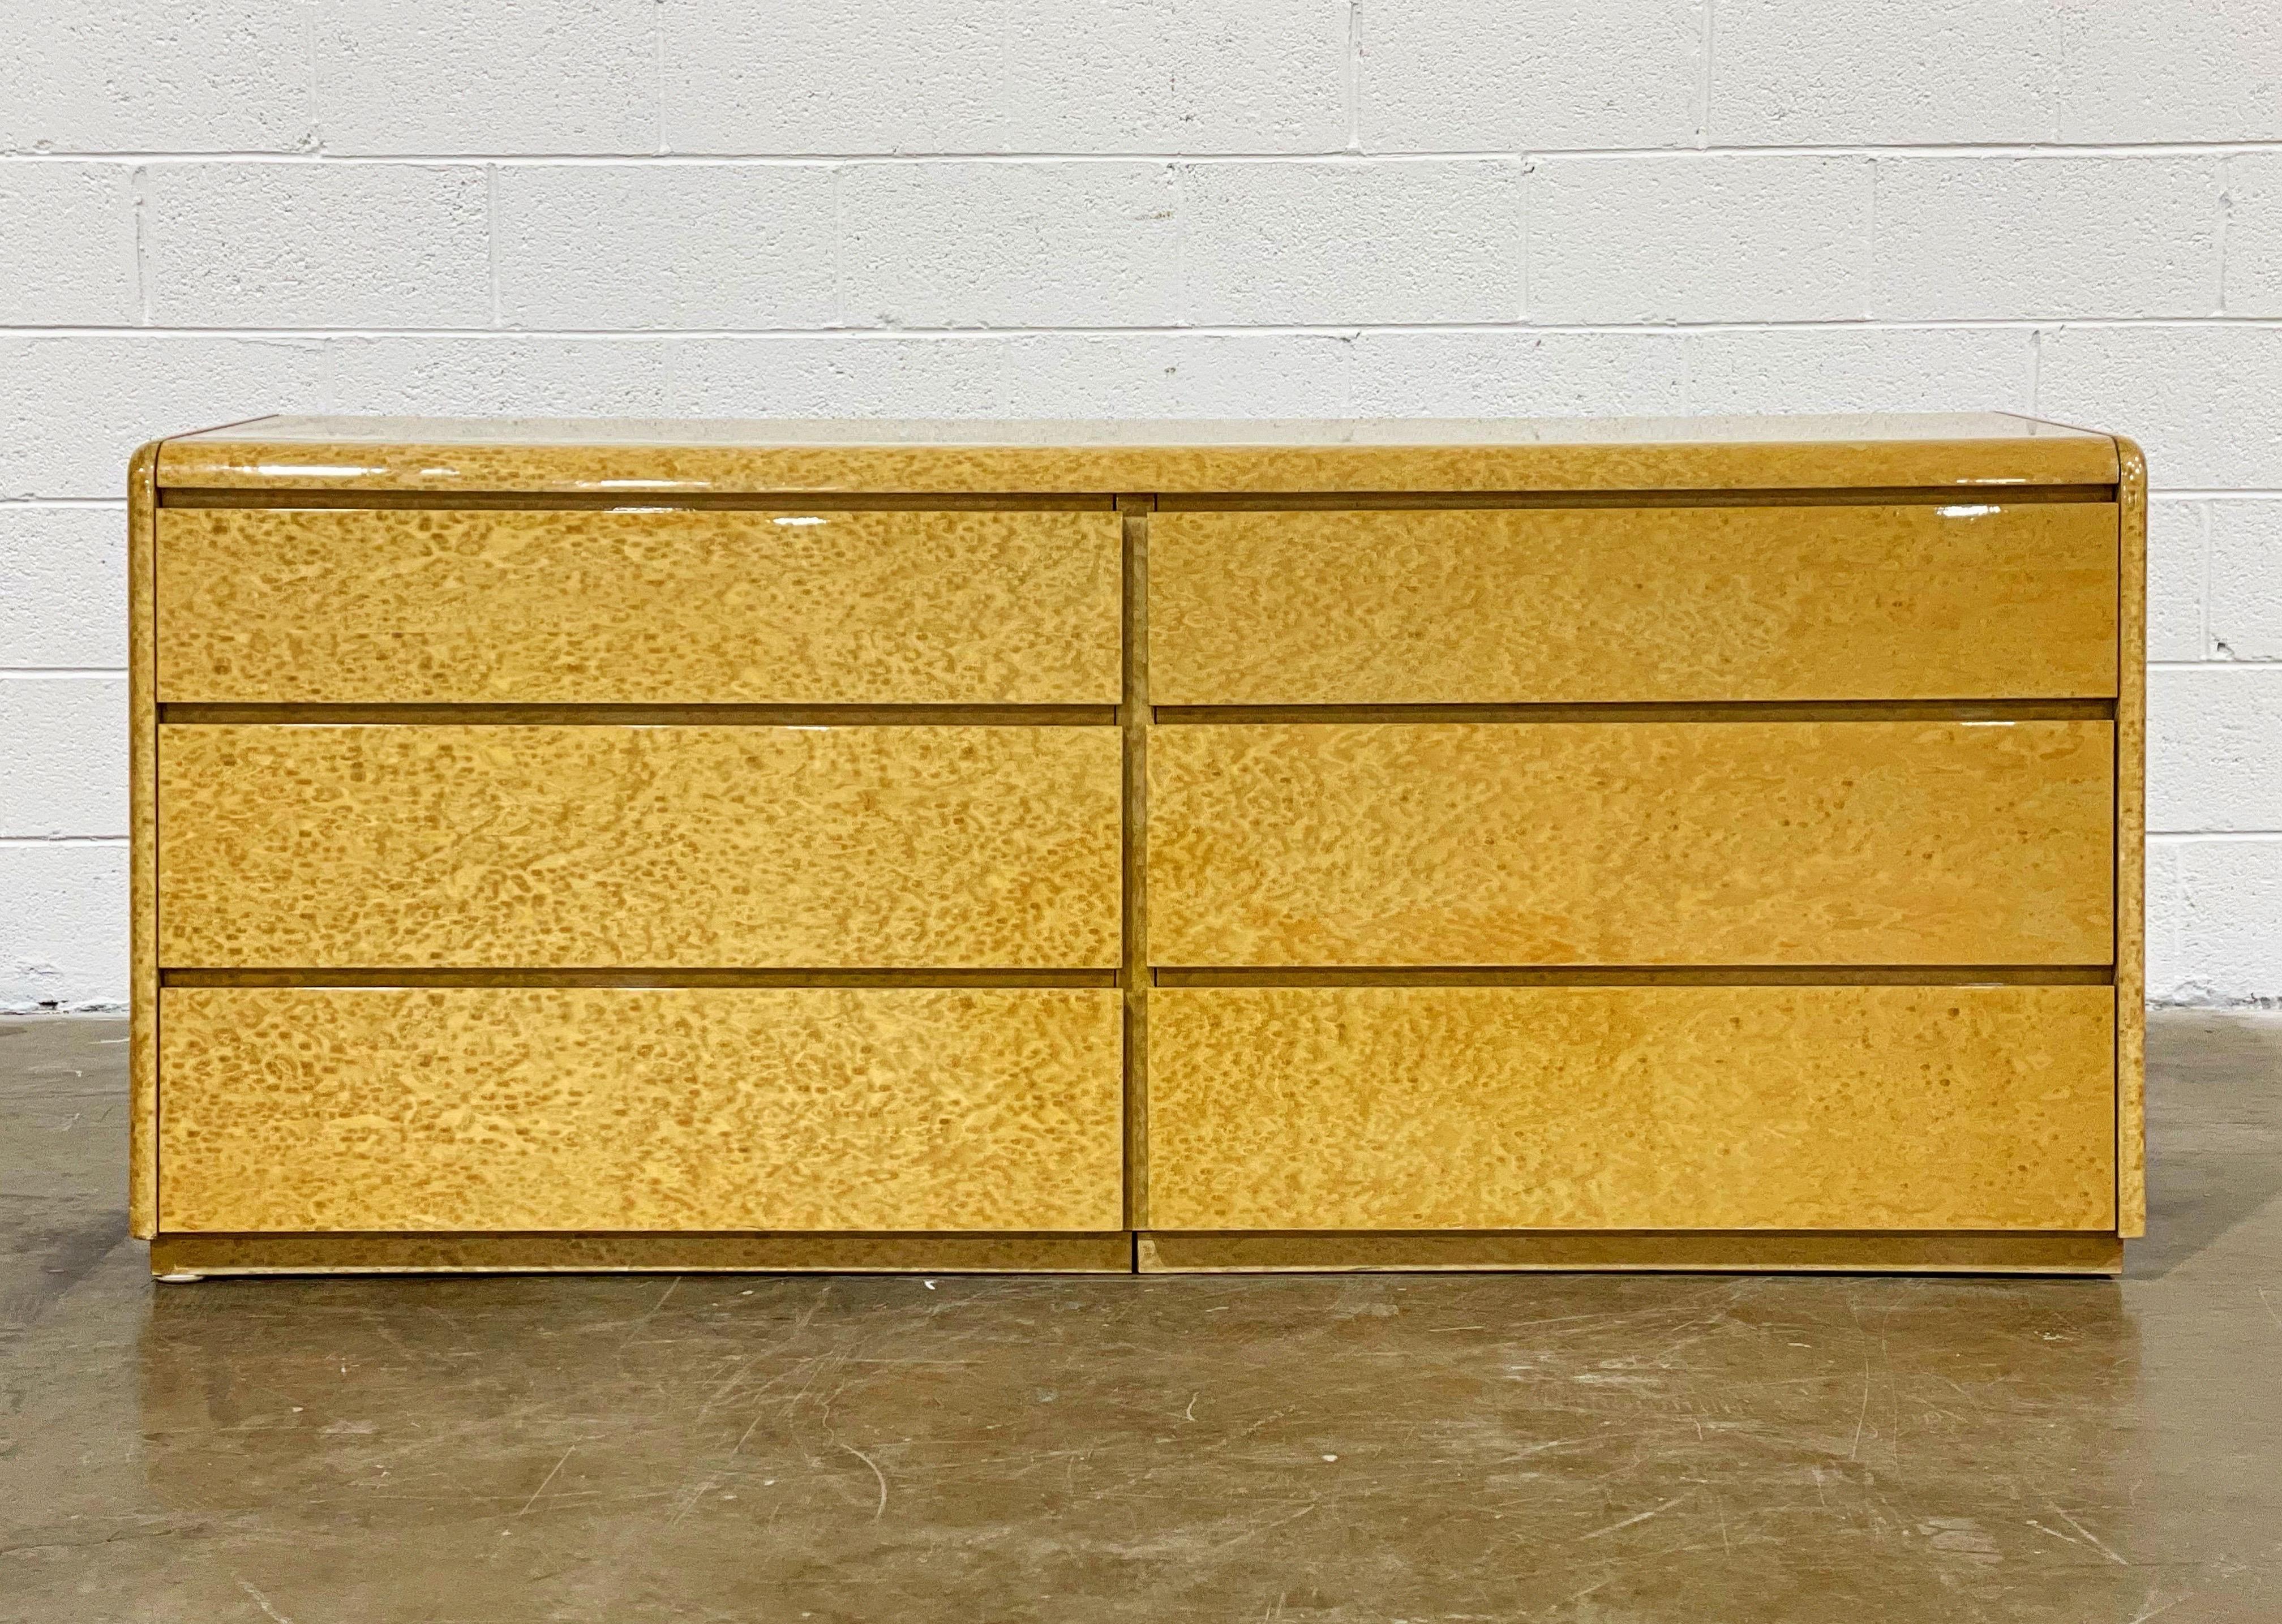 Unique on the market - exquisite midcentury six drawer dresser by COMA, Italy circa 1978. Stunning lacquered birdseye maple. Drawers operate smooth and retain the original foil COMA label. Excellent time capsule condition with no flaws of note.